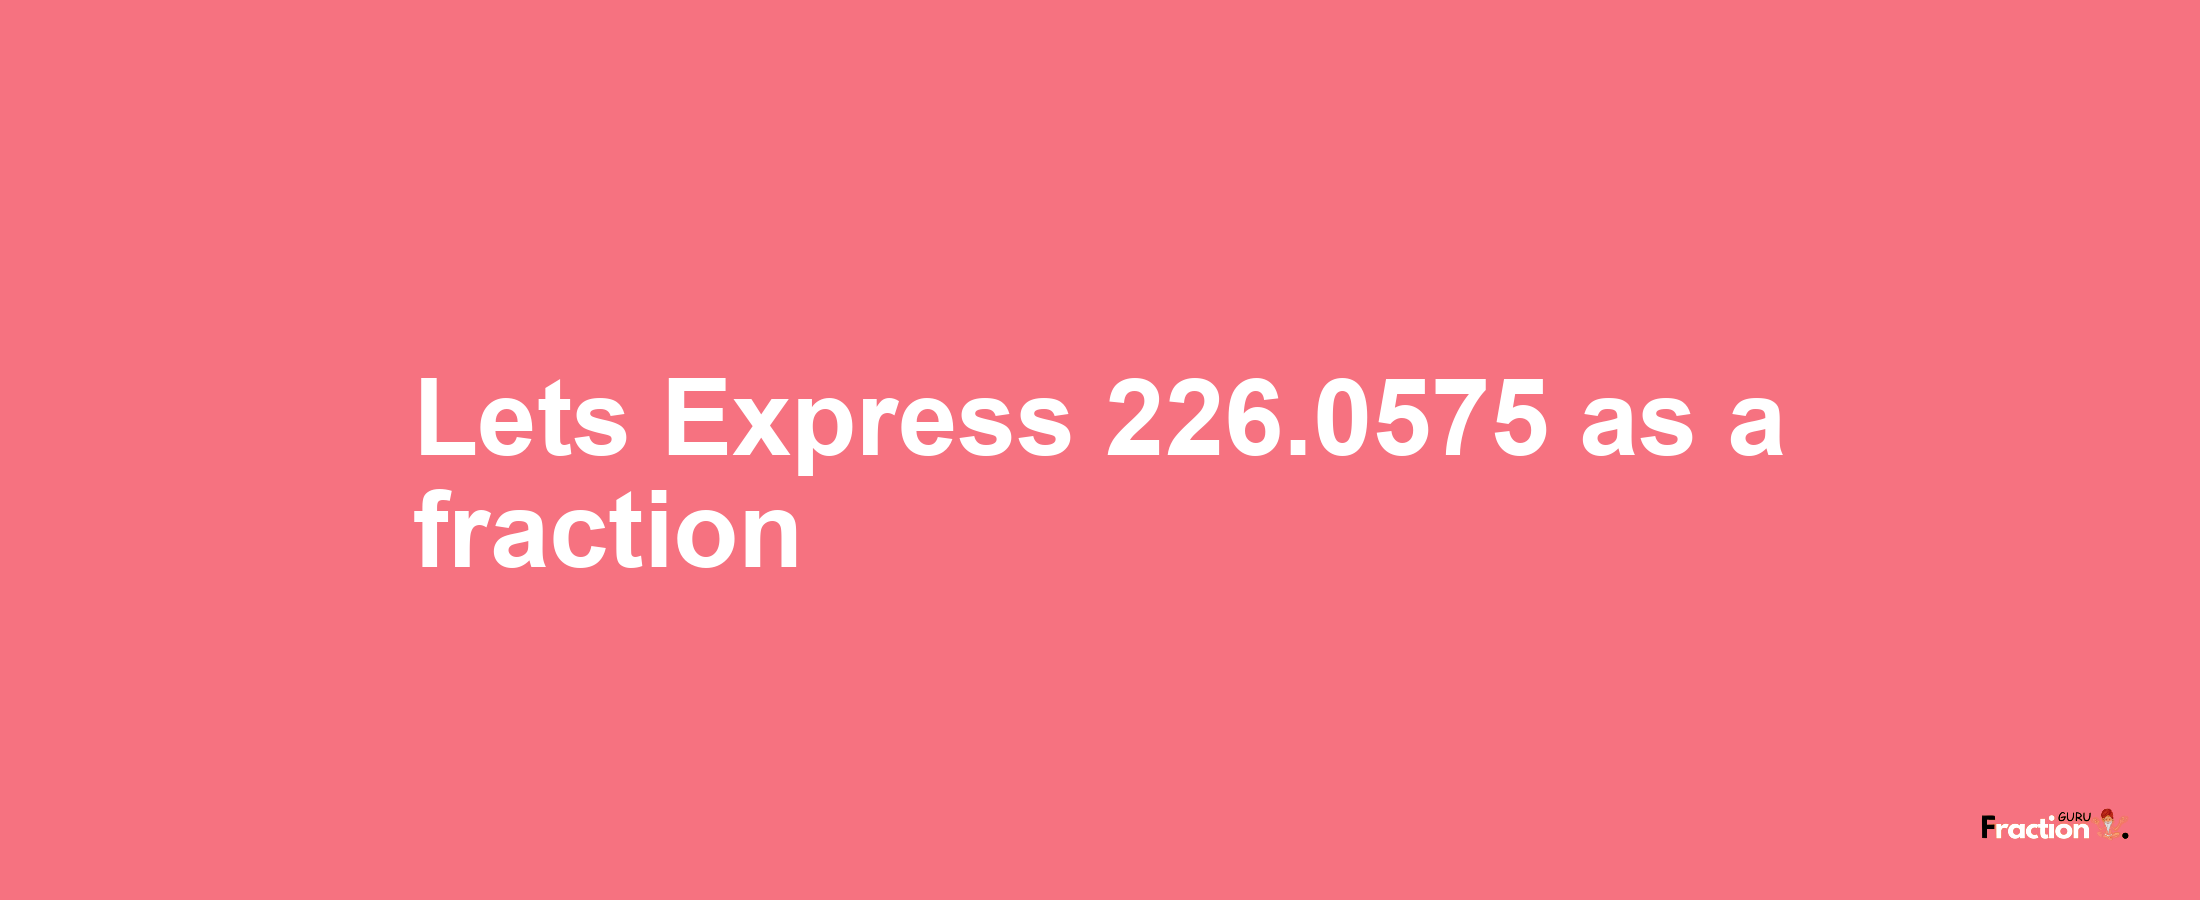 Lets Express 226.0575 as afraction